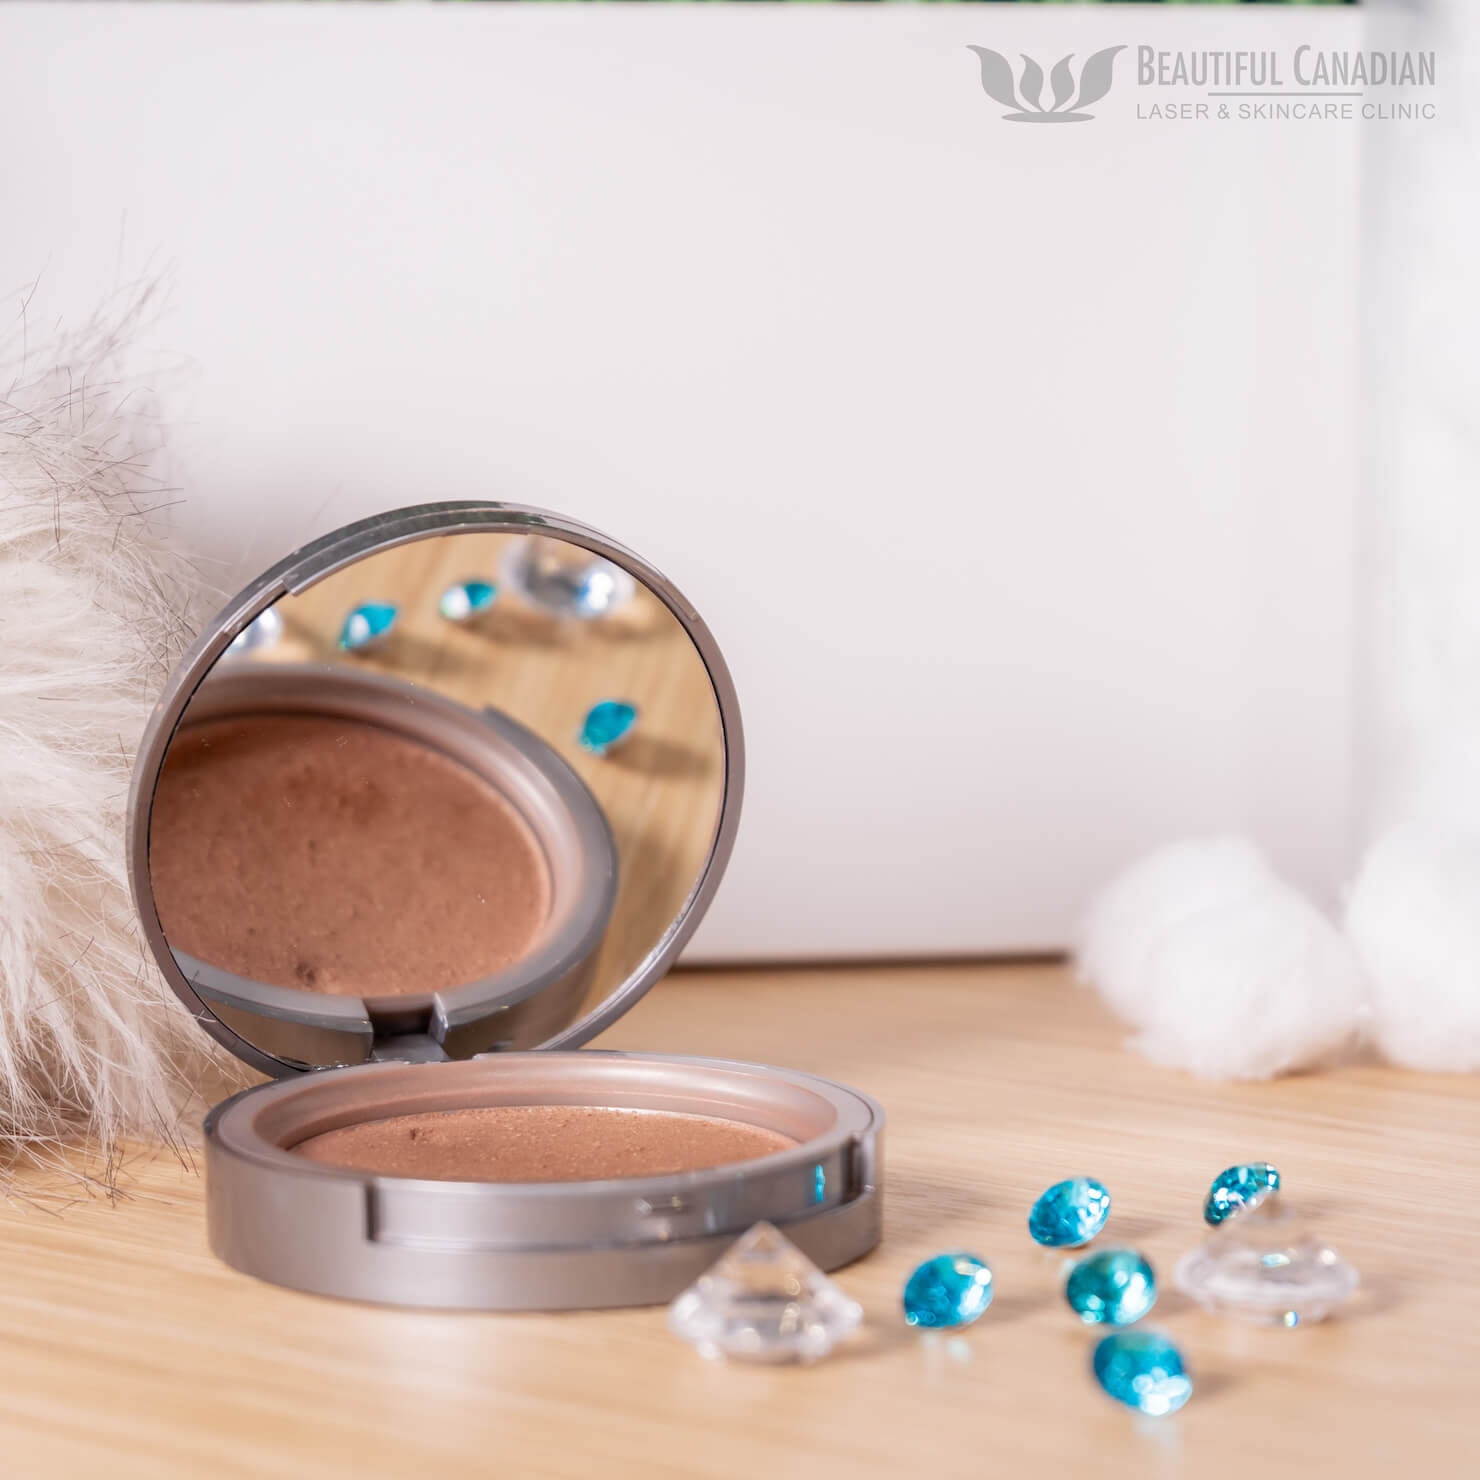 Pressed Mineral Bronzer by Colorescience® (Santa Fe) | Buy Online in Canada | Teint-Contouring-Puder